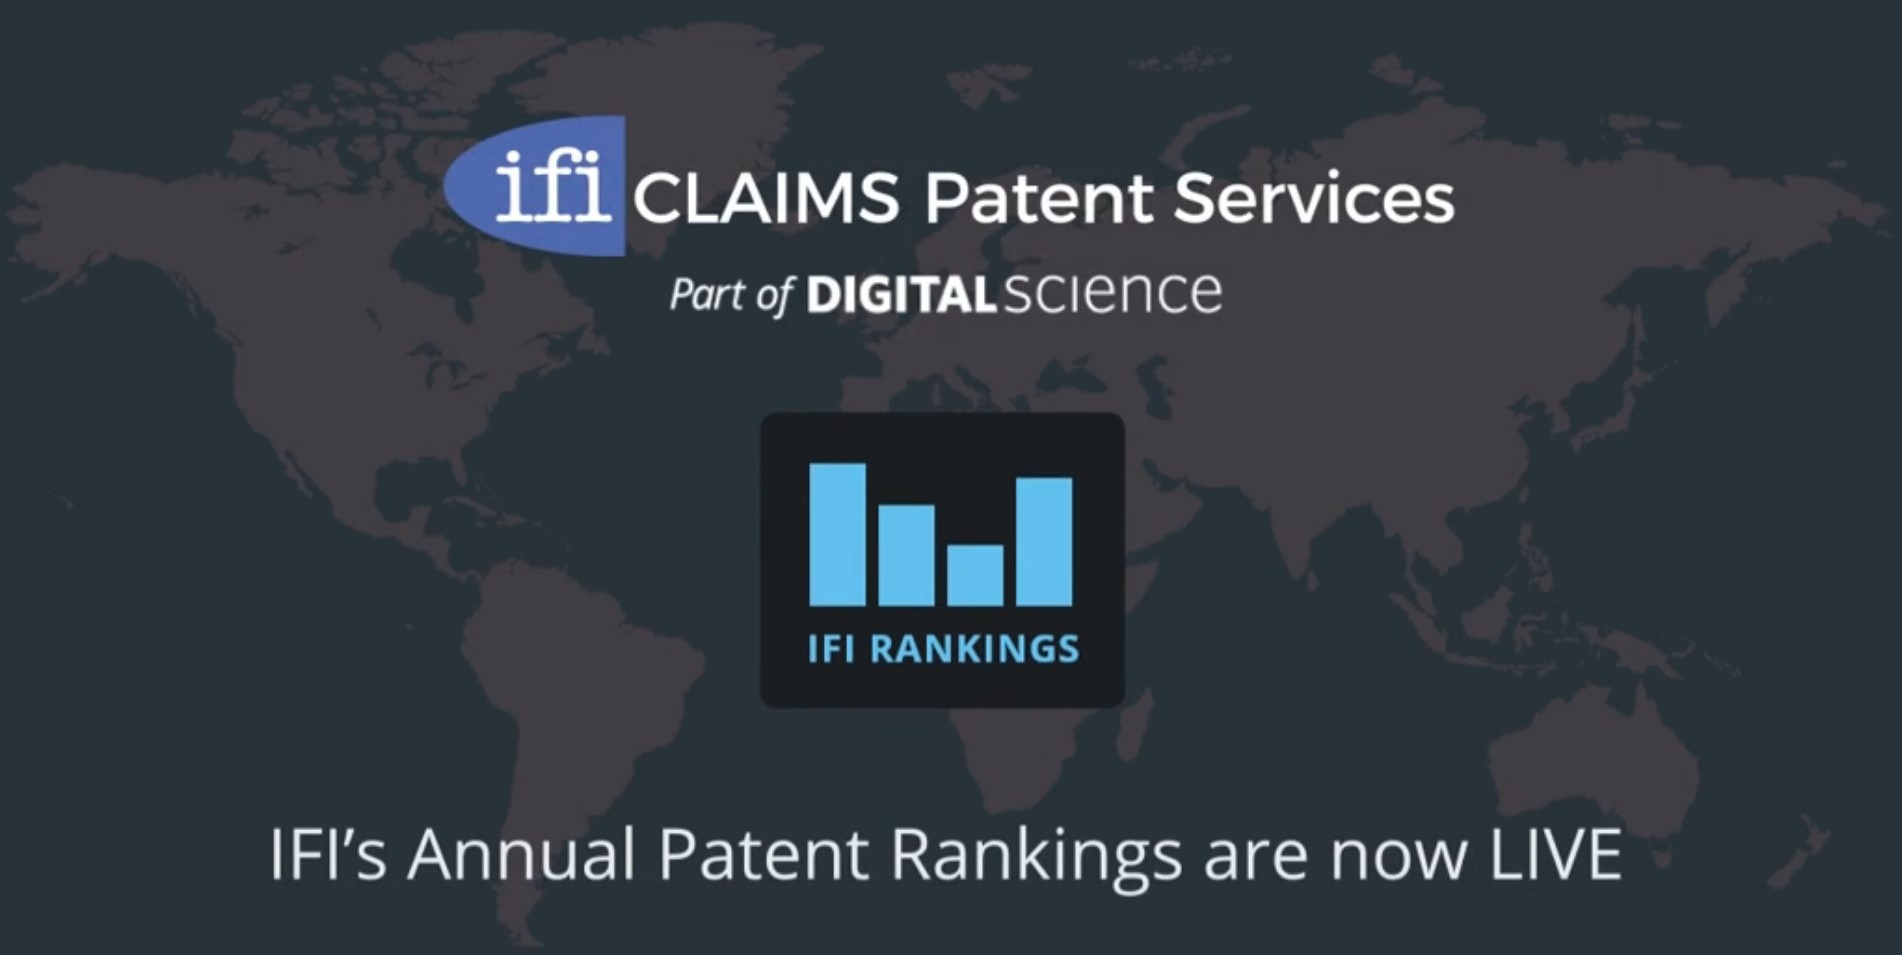 Highlights - patent ranking and trends analysis